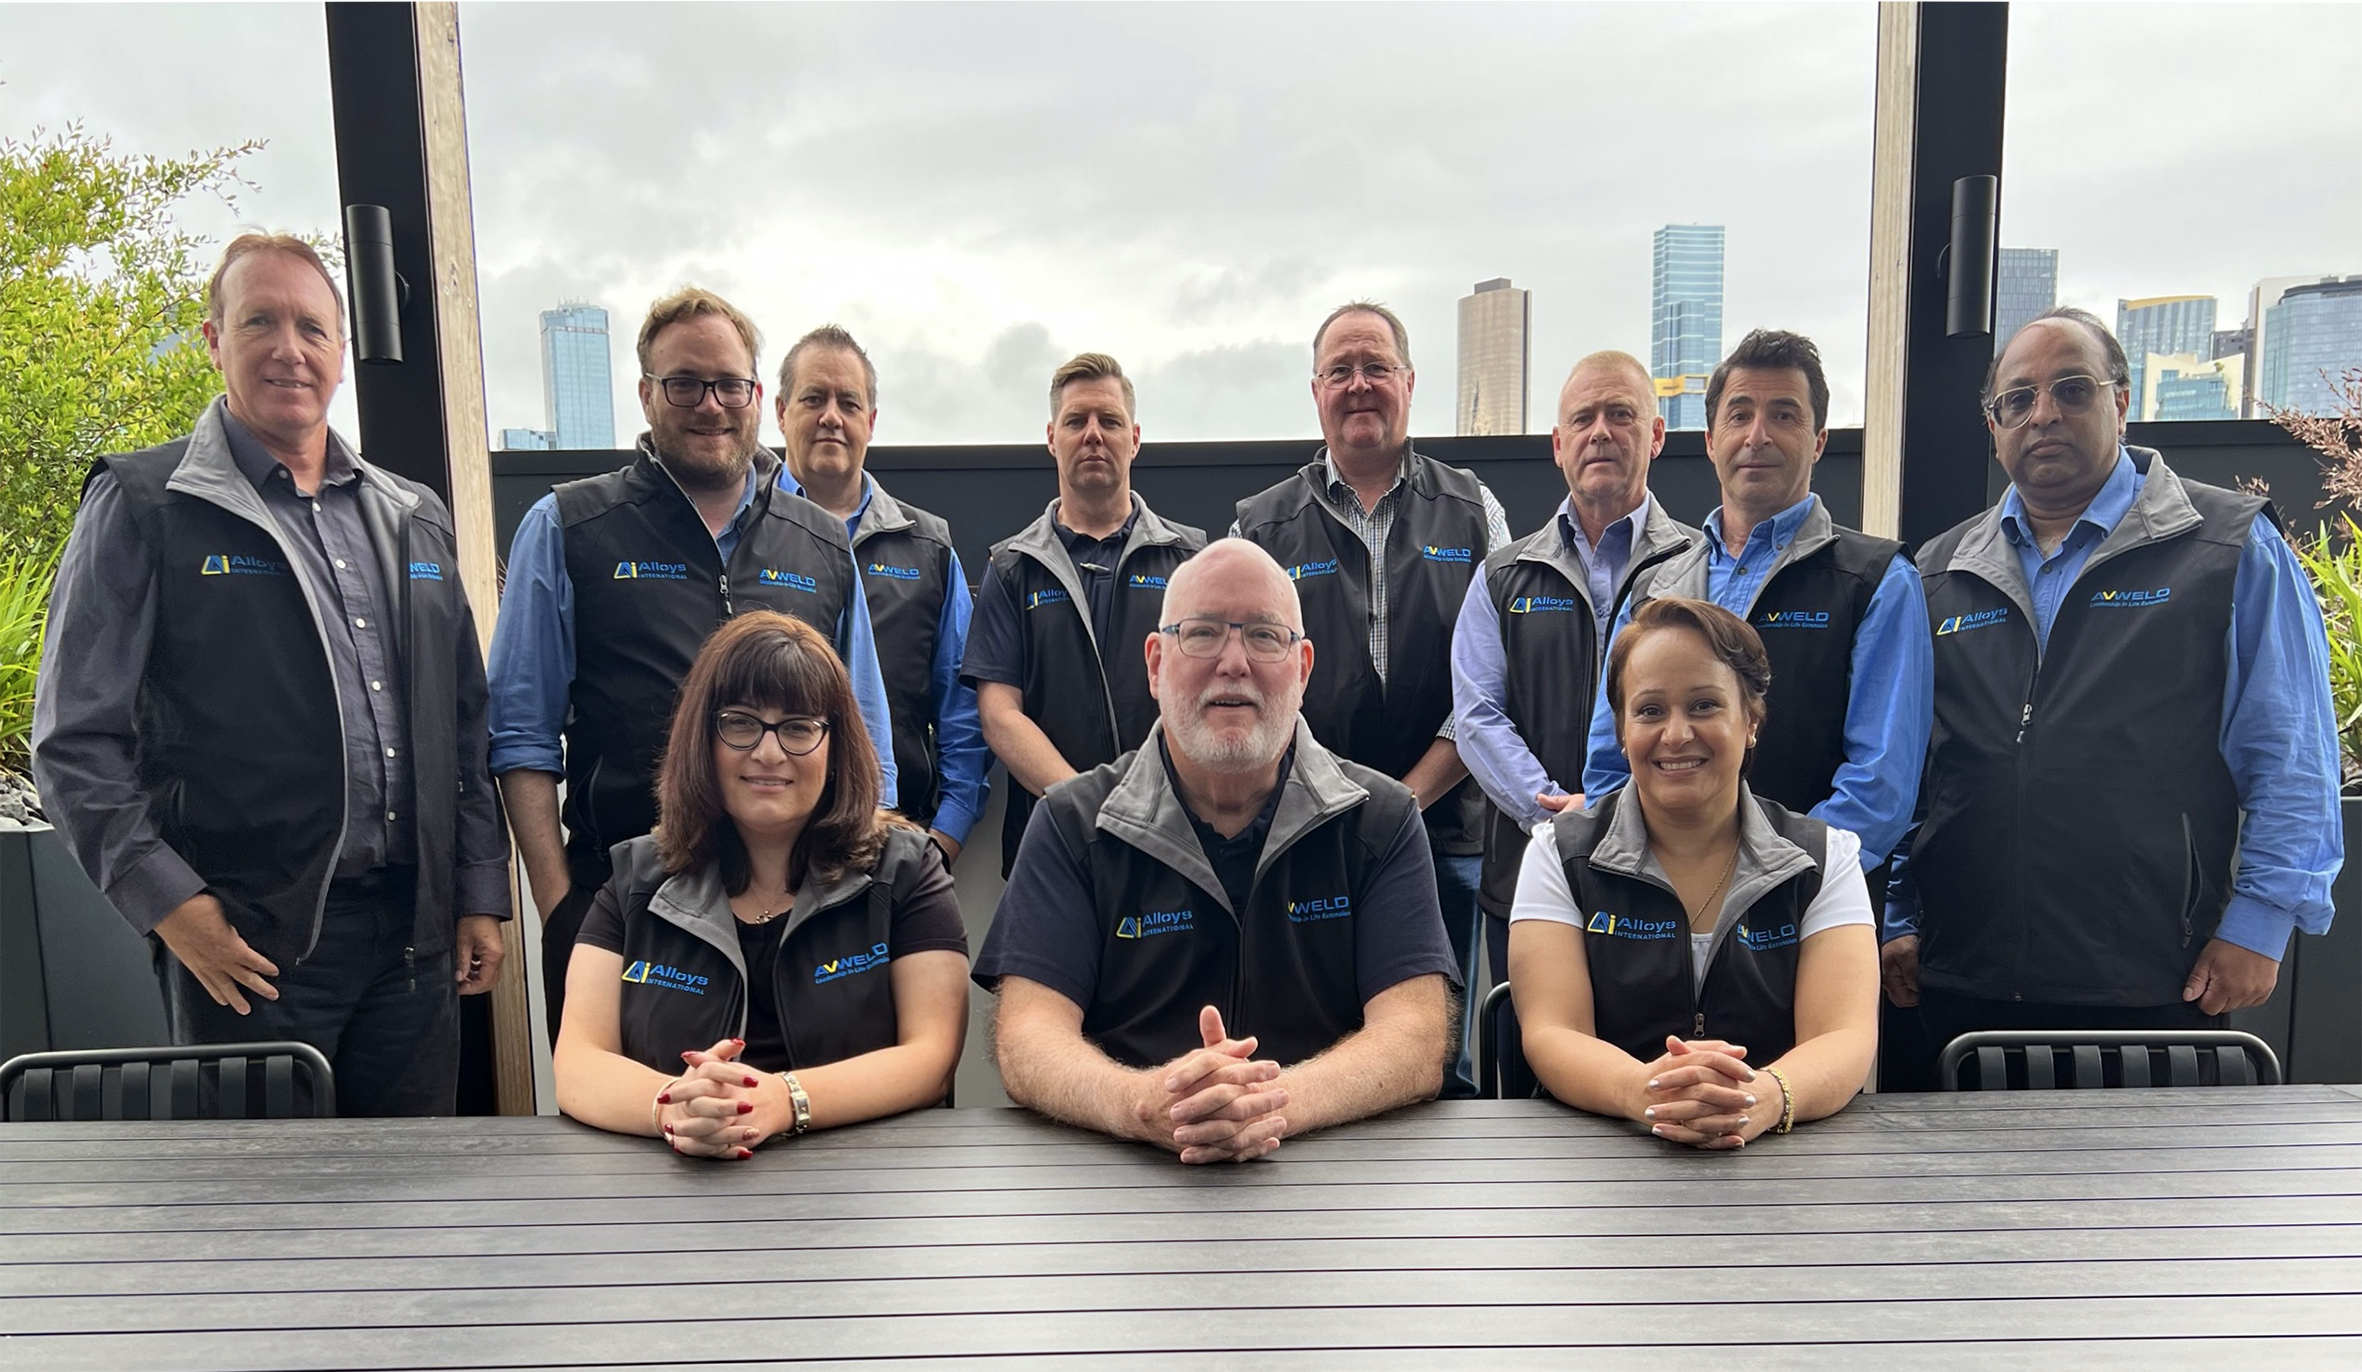 Avweld Alloys Sales, Marketing and Management Team